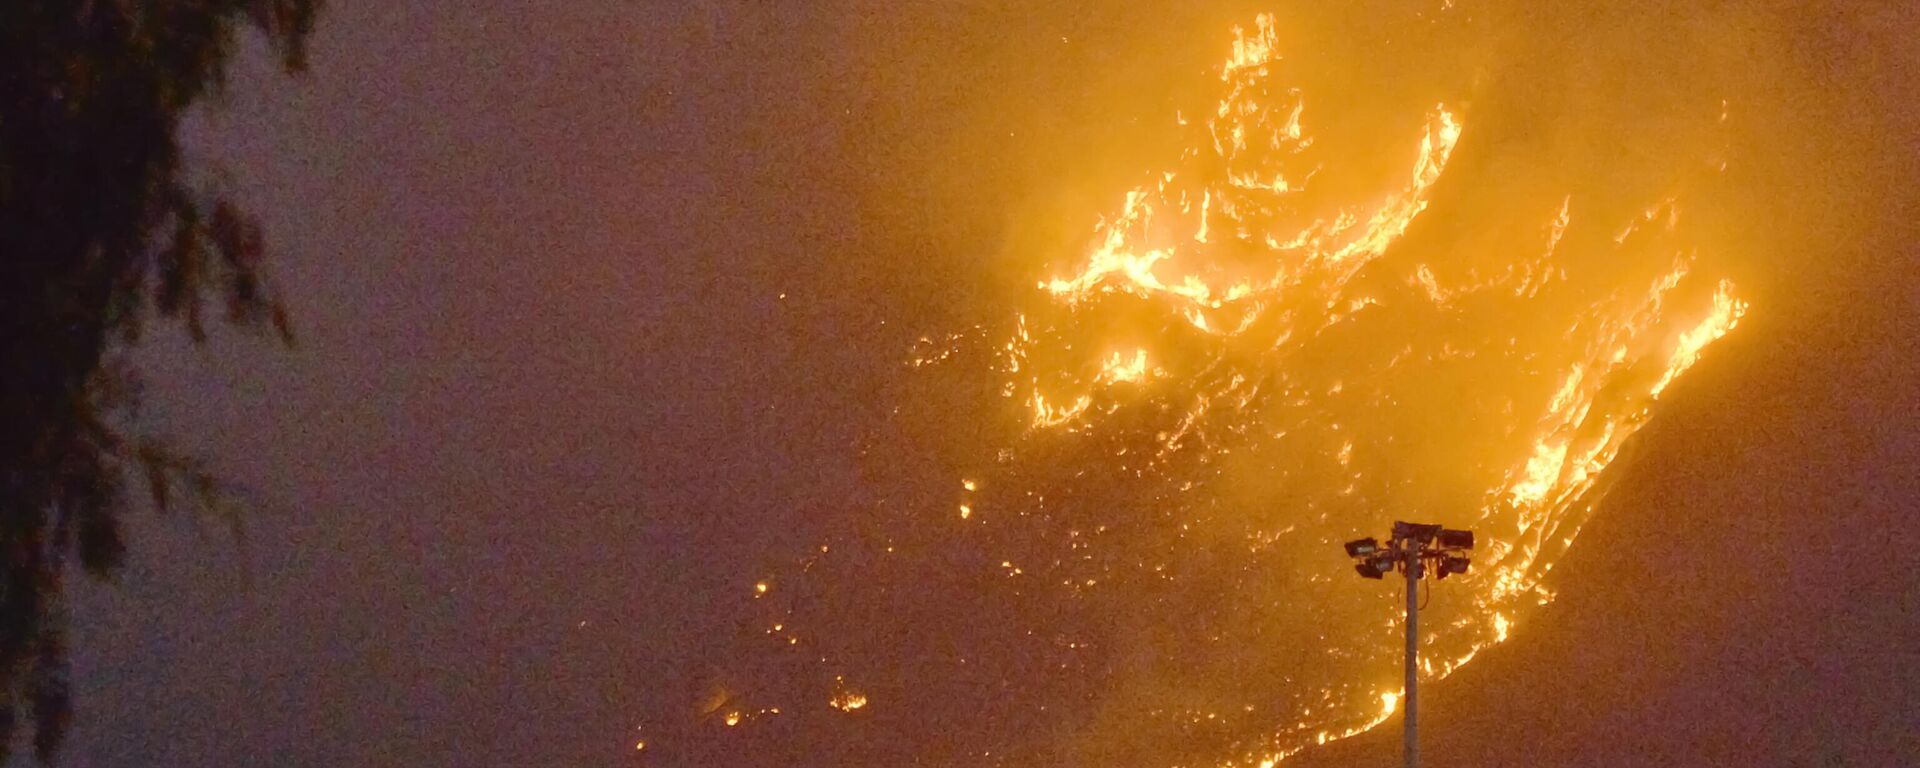 This photo obtained from Italian news agency Ansa shows a vast fire spreading on hills in the area of Monte Grifone and the town of Ciaculli around Palermo, Sicily, on July 25, 2023, with flames threatening nearby houses. Sicilian firefighters were fighting overnight against several fires, one of which neared Palermo airport, forcing it to close for several hours in the morning. - Sputnik International, 1920, 25.07.2023